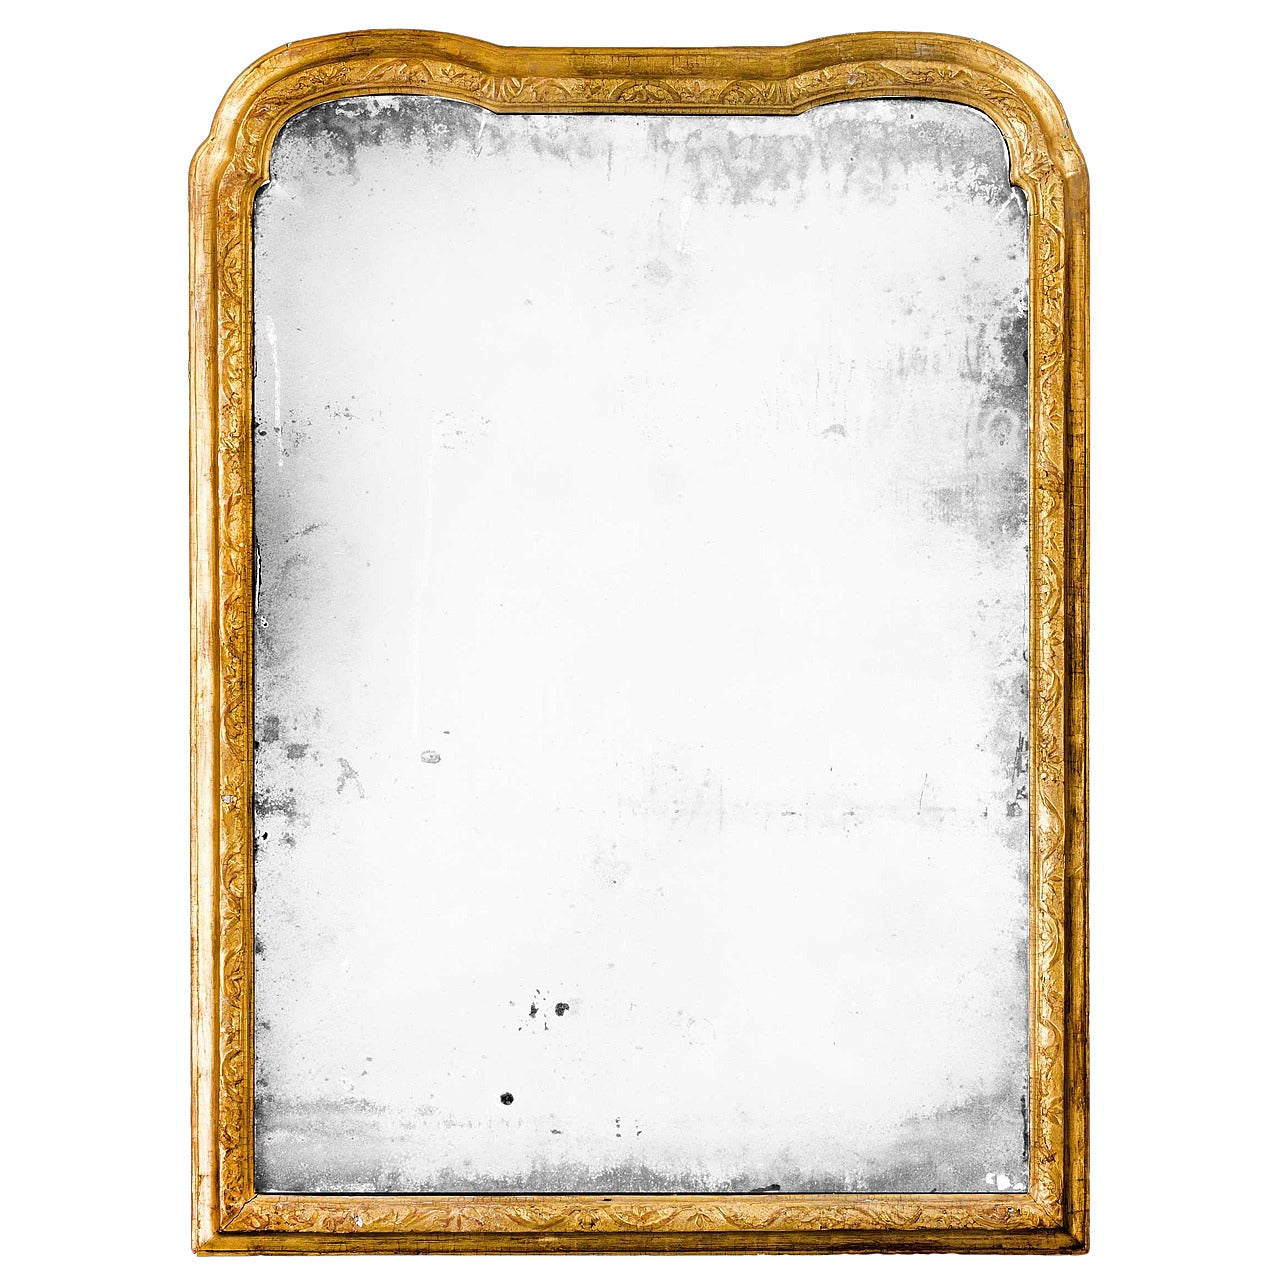 Queen Anne Period Gesso and Giltwood Pier Mirror